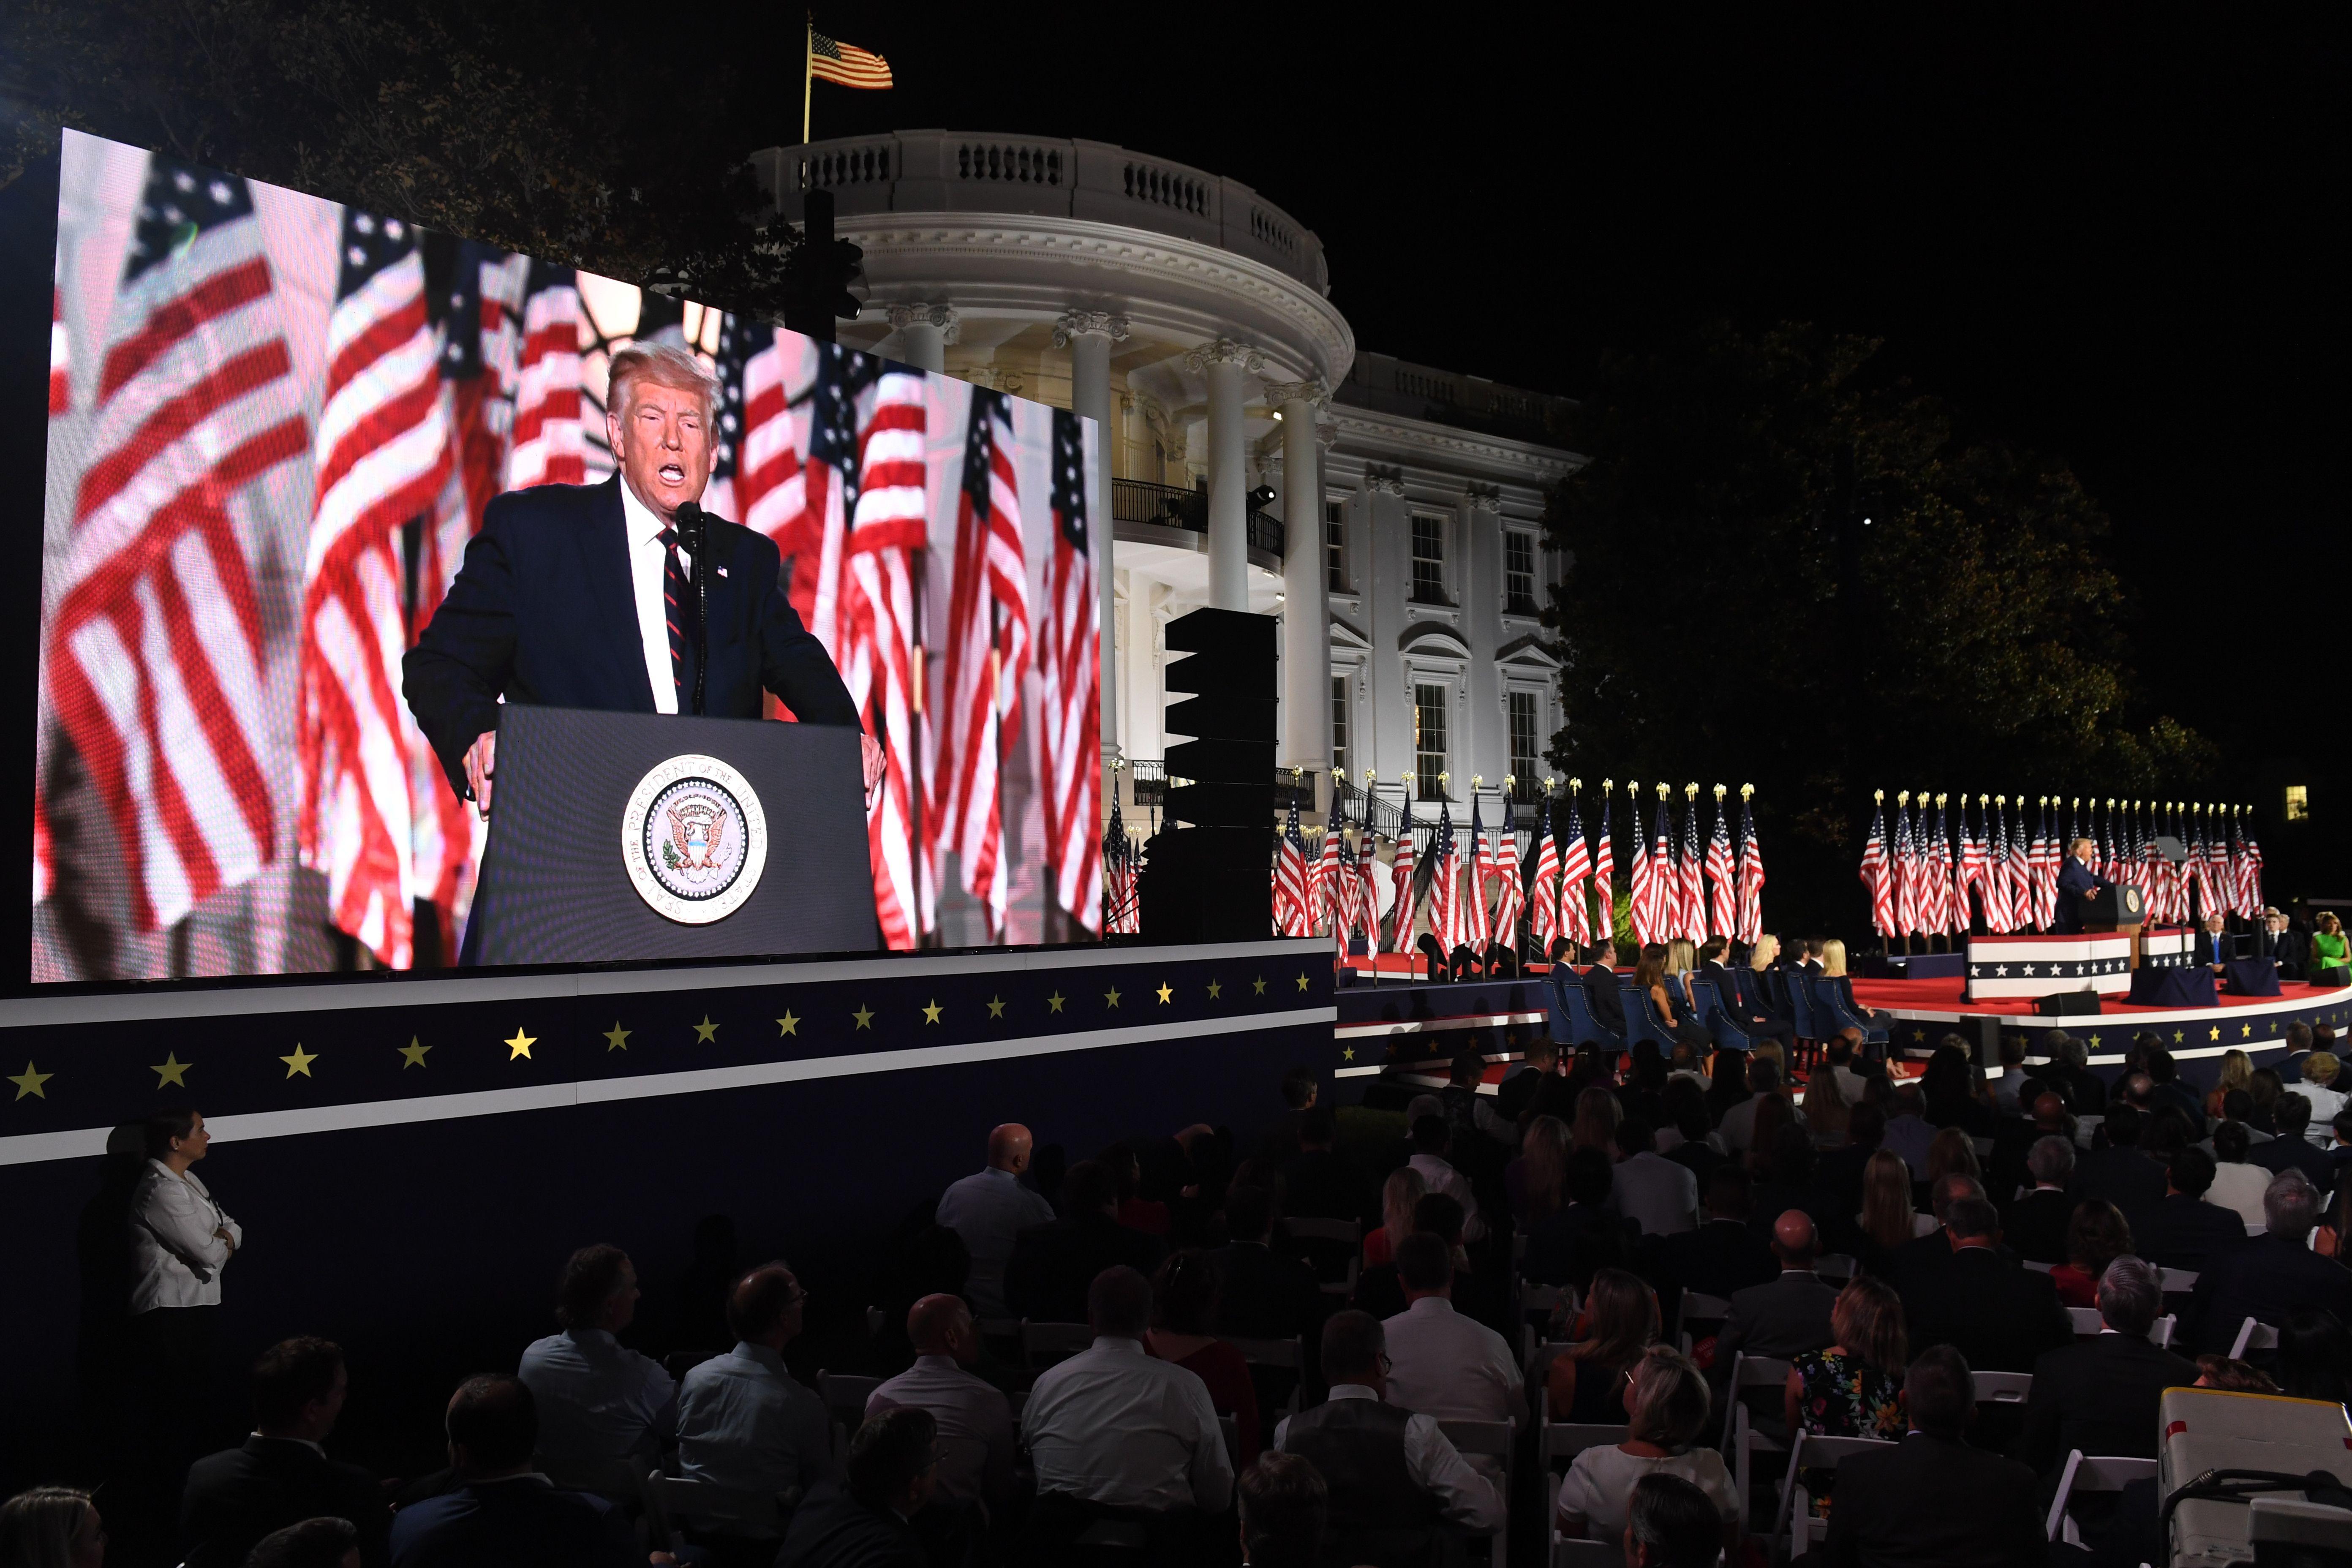 Trump appears on a jumbo screen on the White House lawn, with the White House behind him.